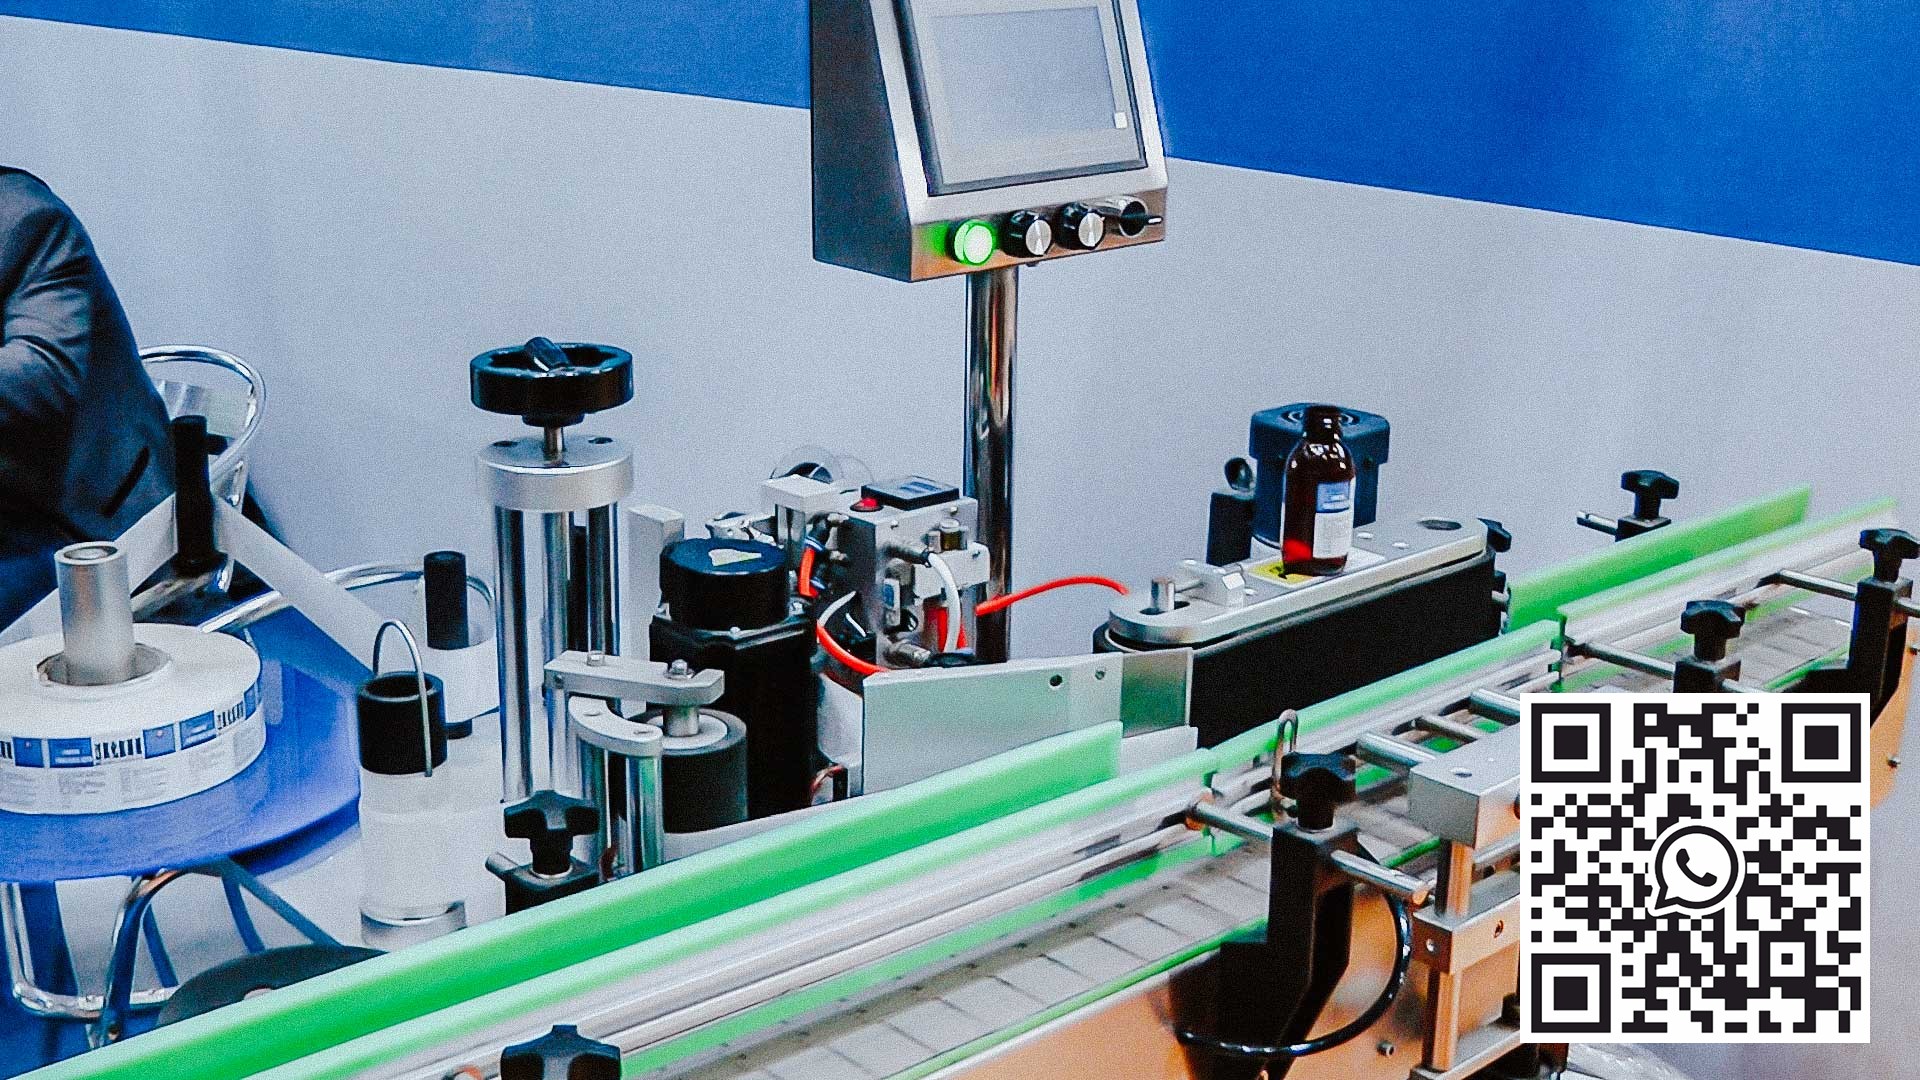 Automatic labeling machine for sticking self-adhesive labels on glass bottles with syrup